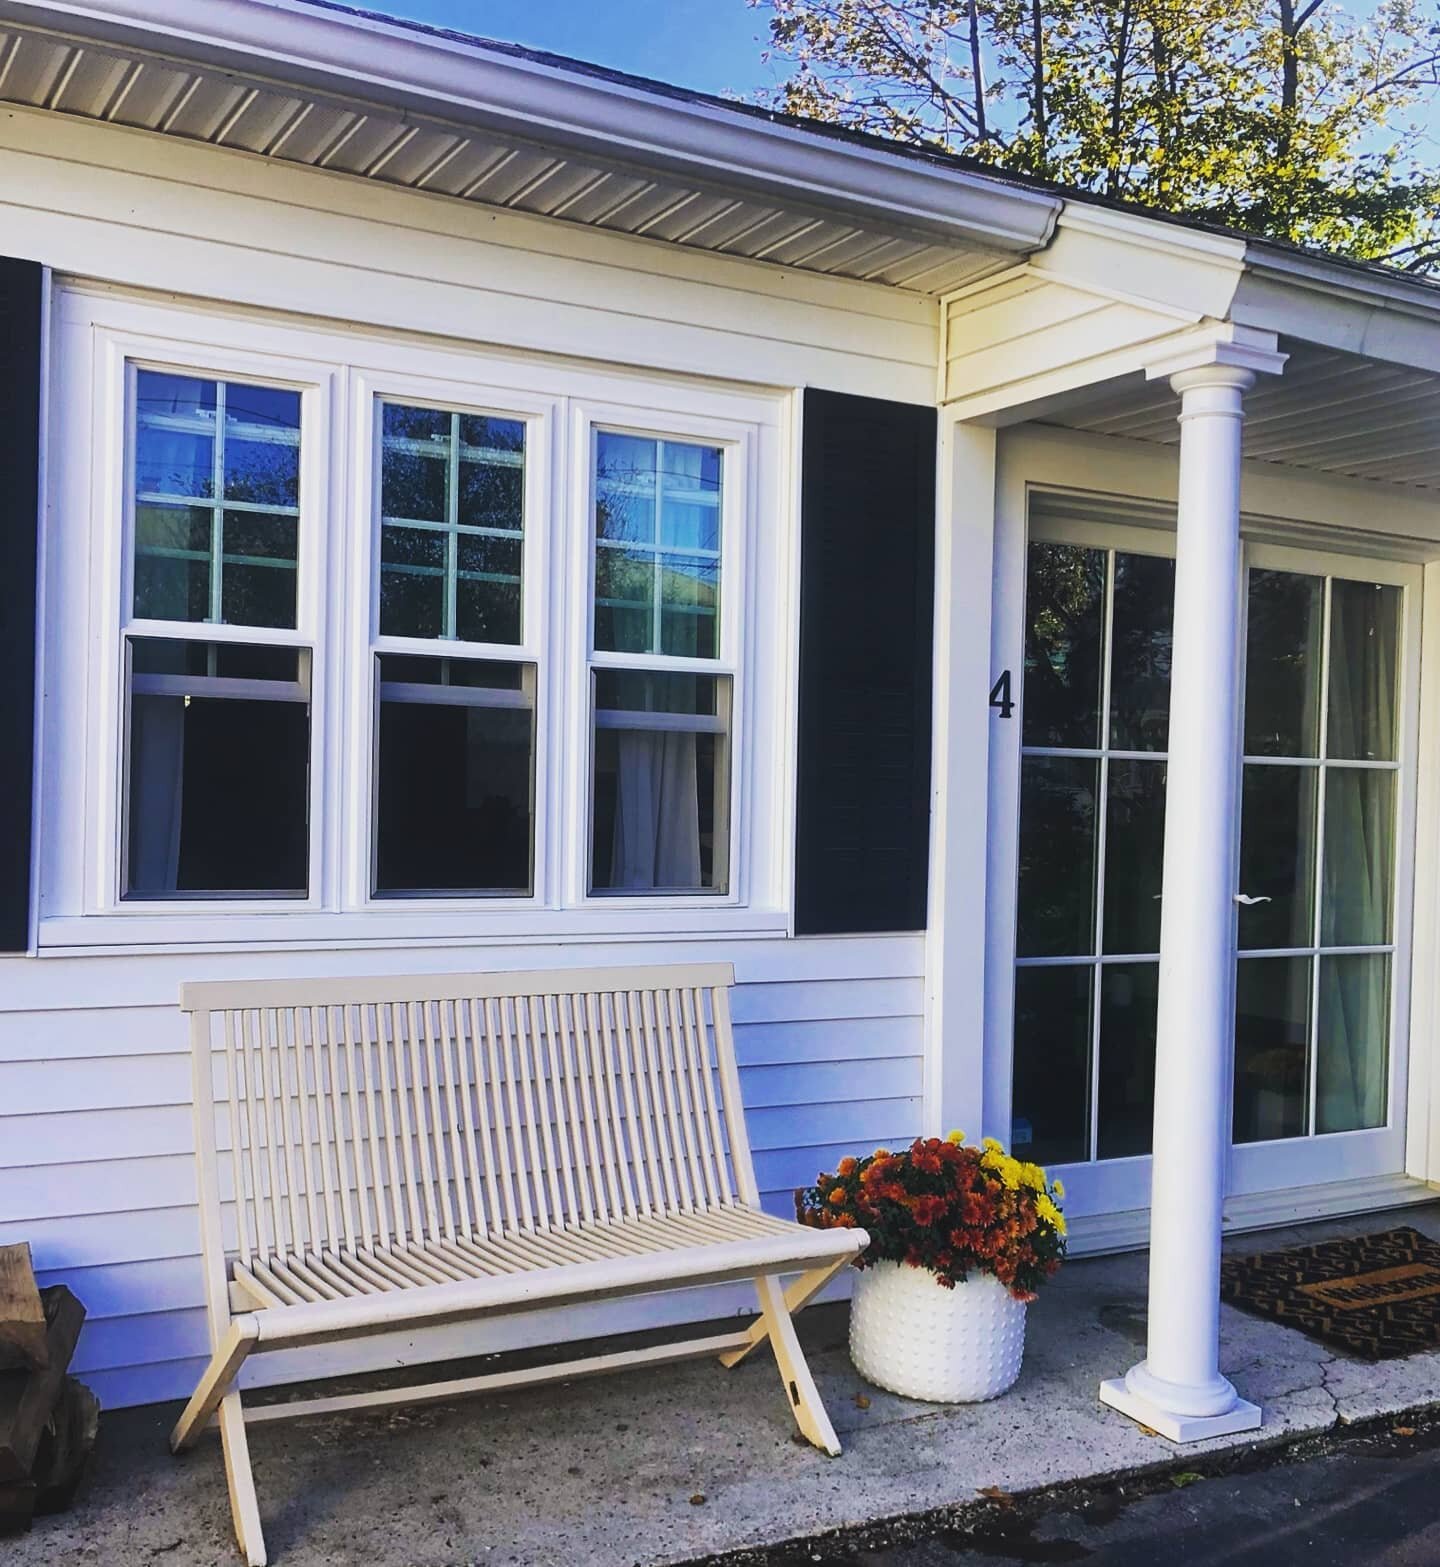 A few changes can have a major impact. Here, we put in a new French door, windows, and columns to one of our favorite people's homes - @aprilcontrado_realestate (whose personal touches really pulled the look together). Always a fun project when you'r